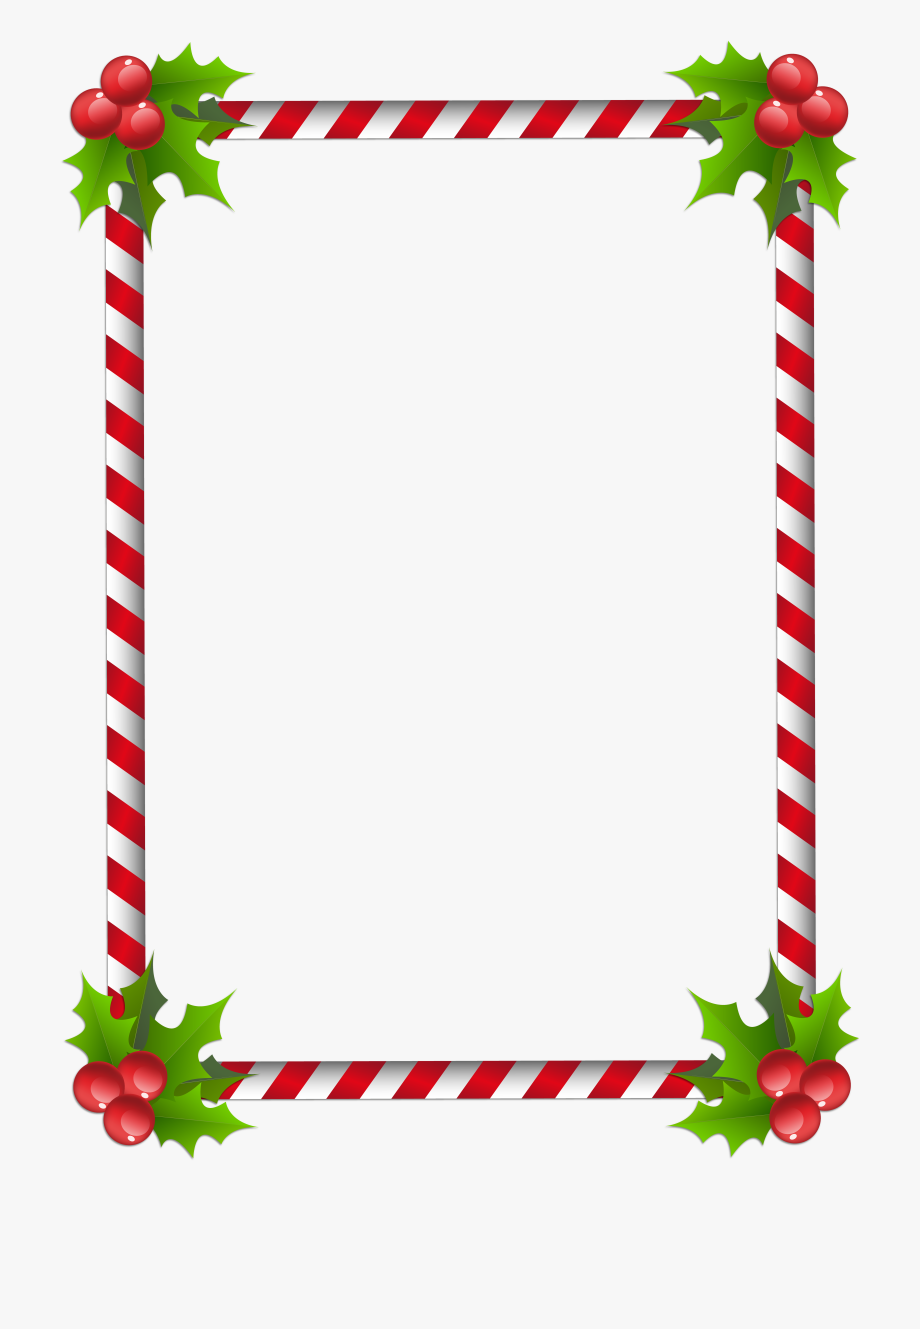 Free Christmas Images Clip Art Borders  File formats include gif, jpg